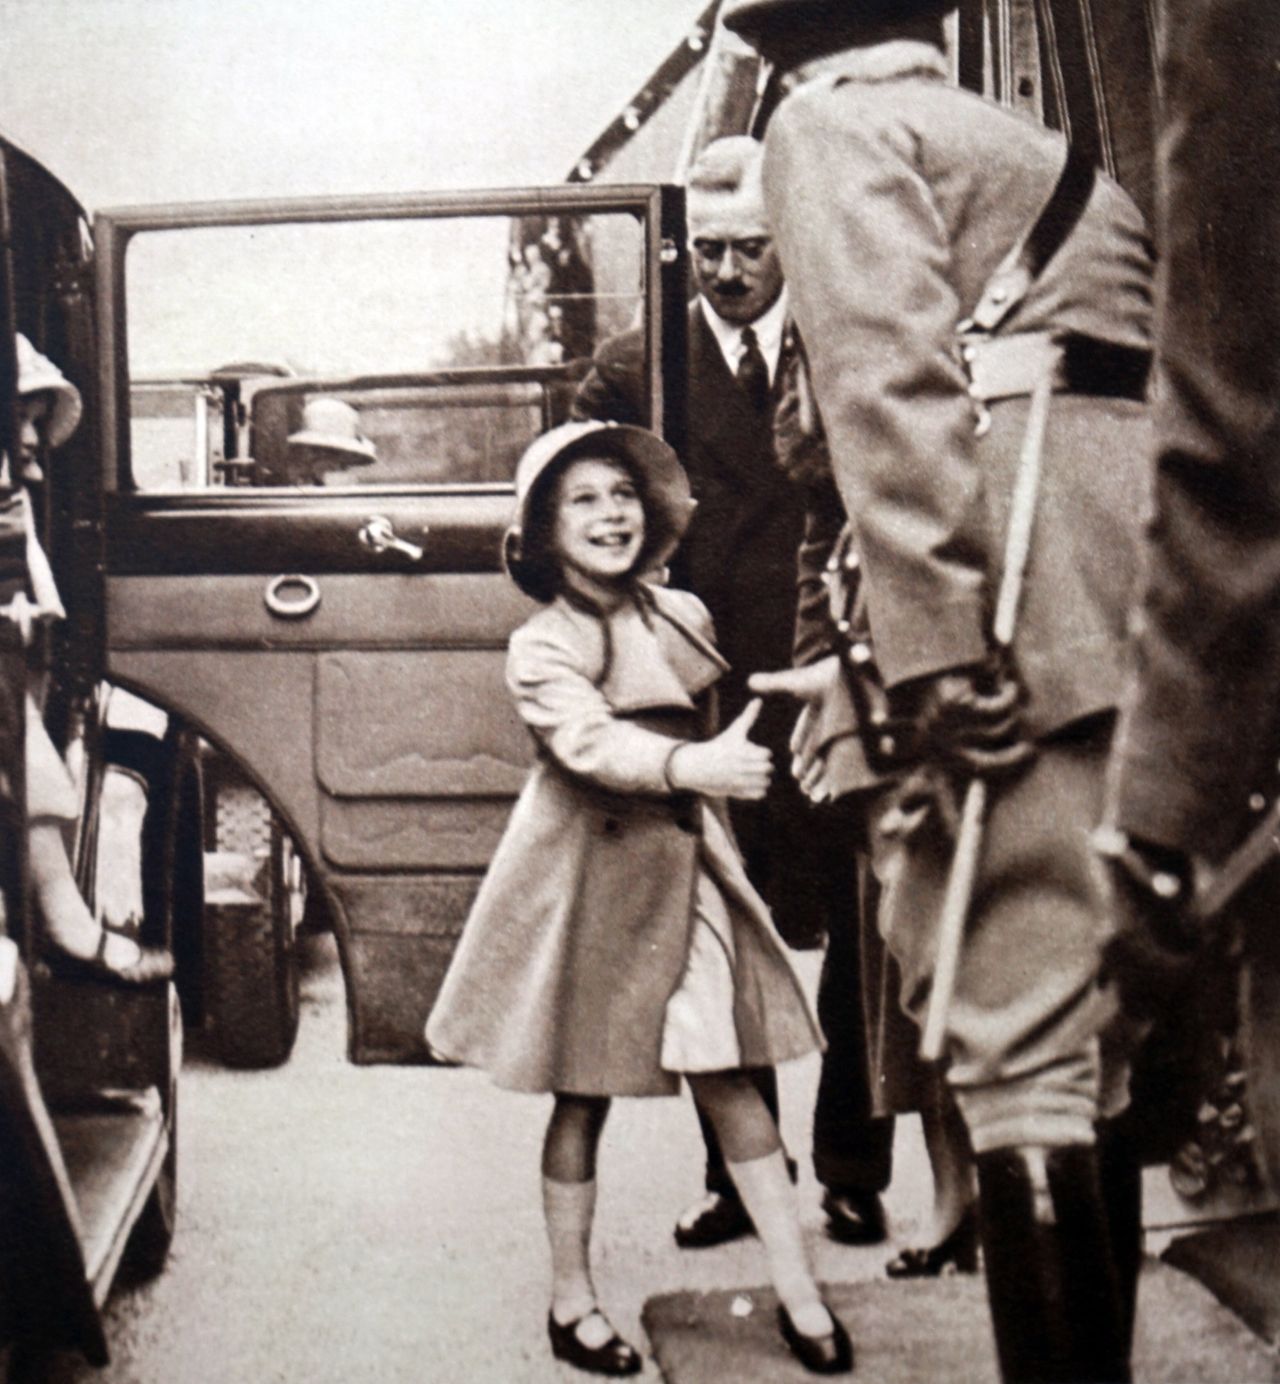 Princess Elizabeth being greeted by an official.